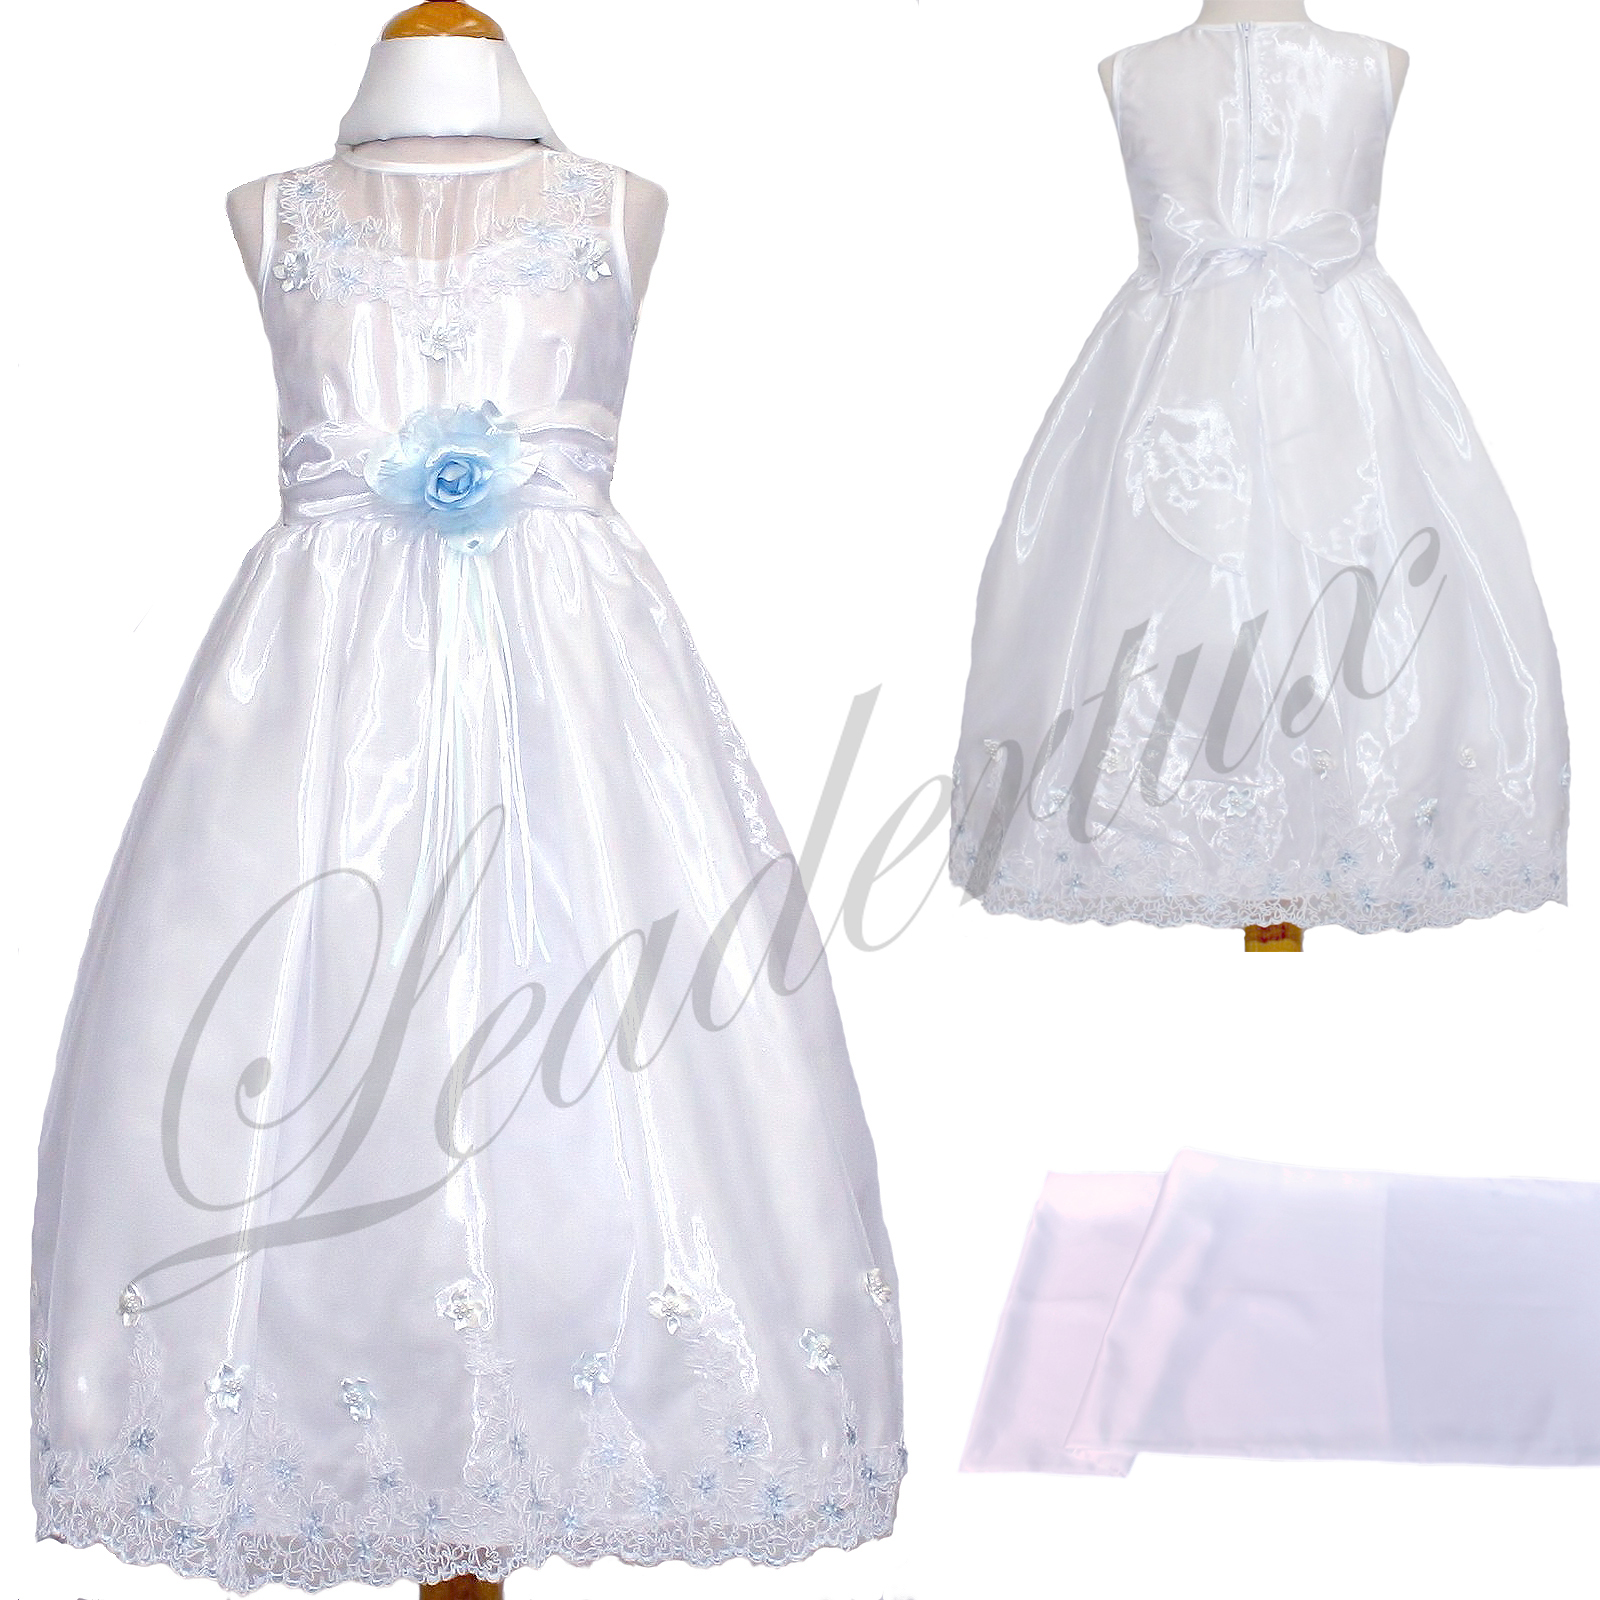 Leadertux New White Blue 2 Baby Toddler Girl National Pageant Wedding Easter Formal Party Birthday Dress